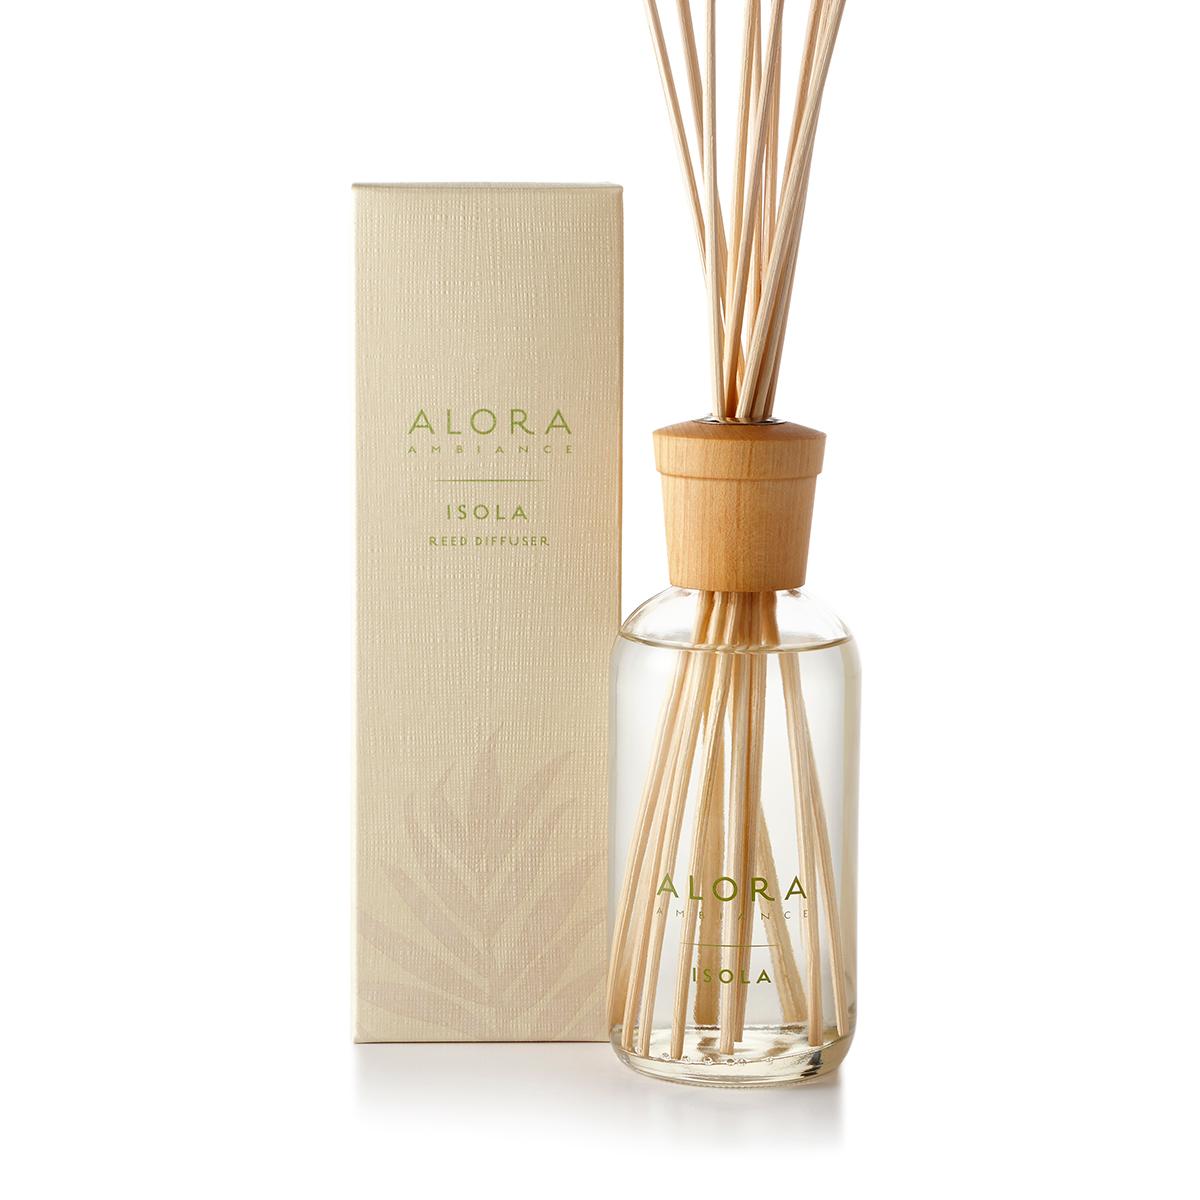 Primary image of Isola Reed Diffuser